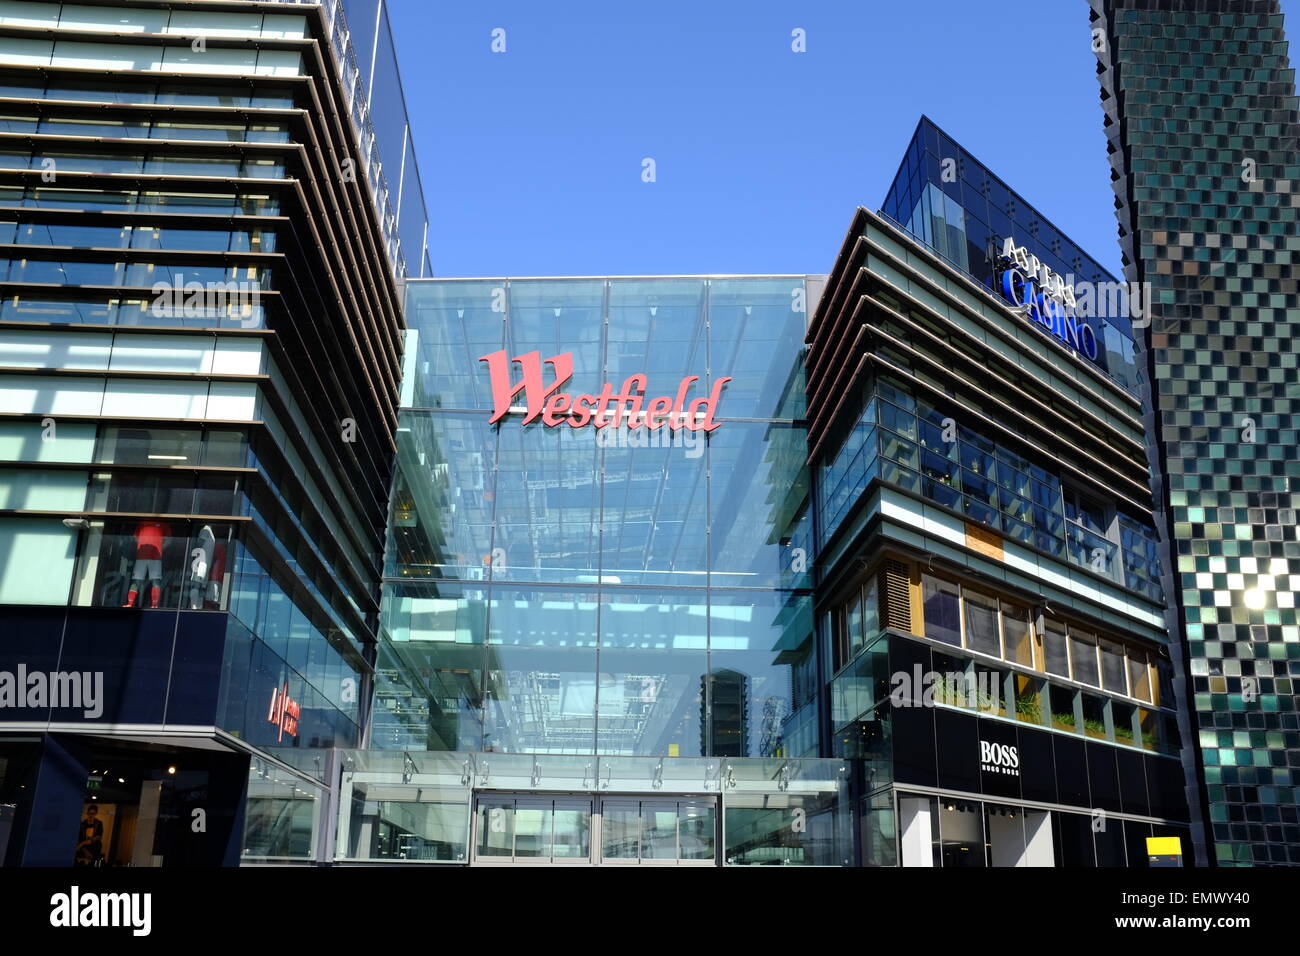 Westfield Shopping Centre - Stratford. Banque D'Images